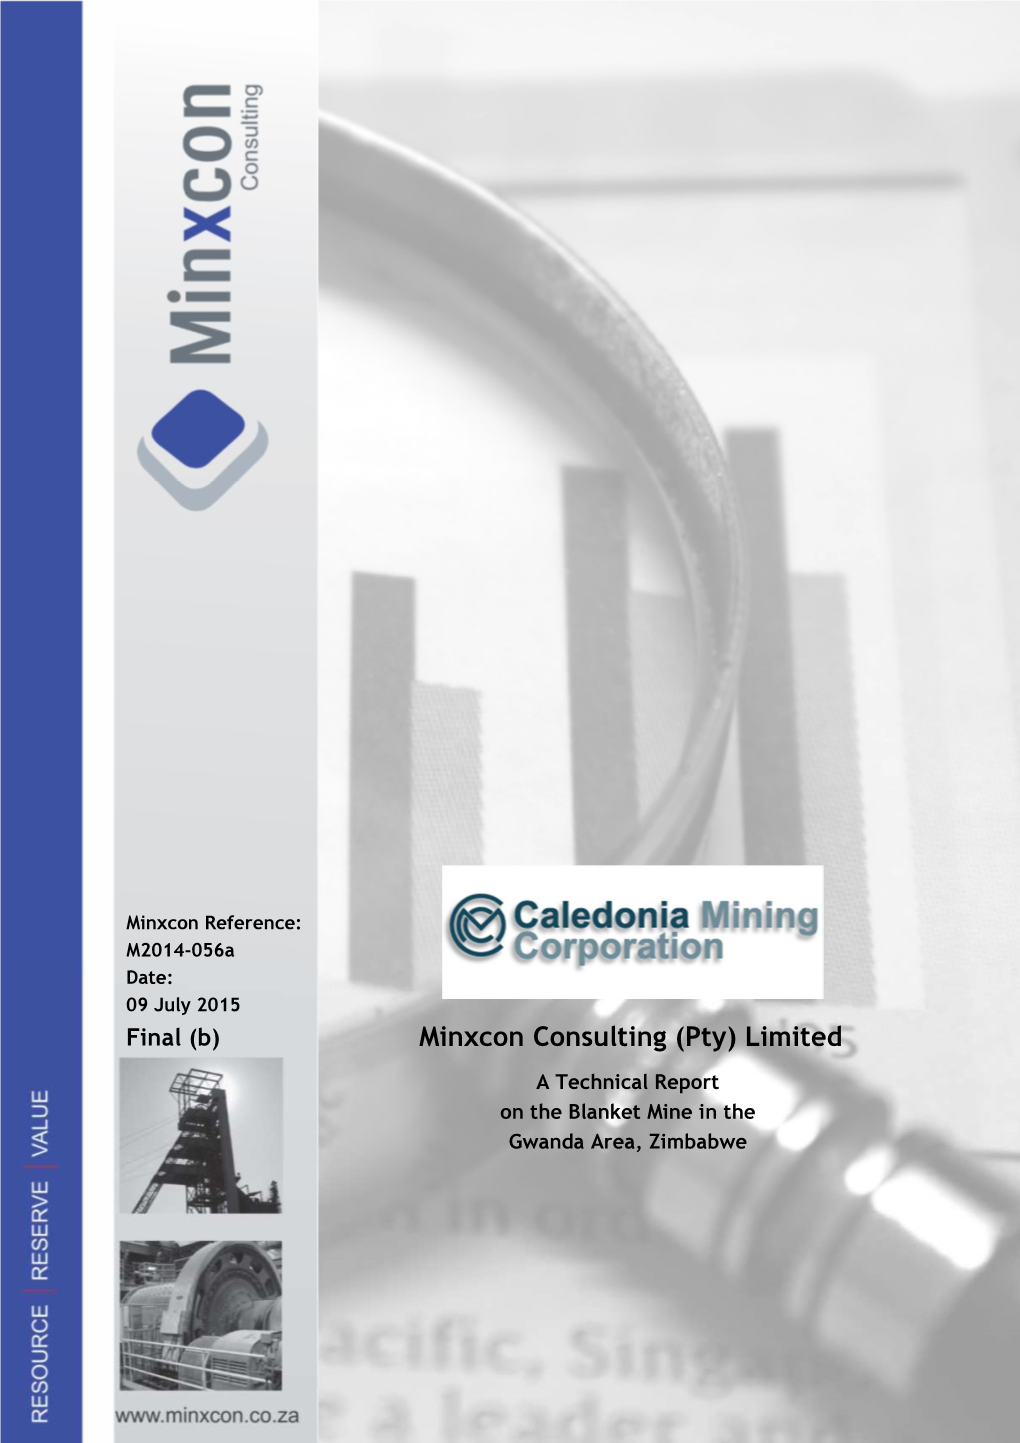 Minxcon Consulting (Pty) Limited a Technical Report on the Blanket Mine in the Gwanda Area, Zimbabwe